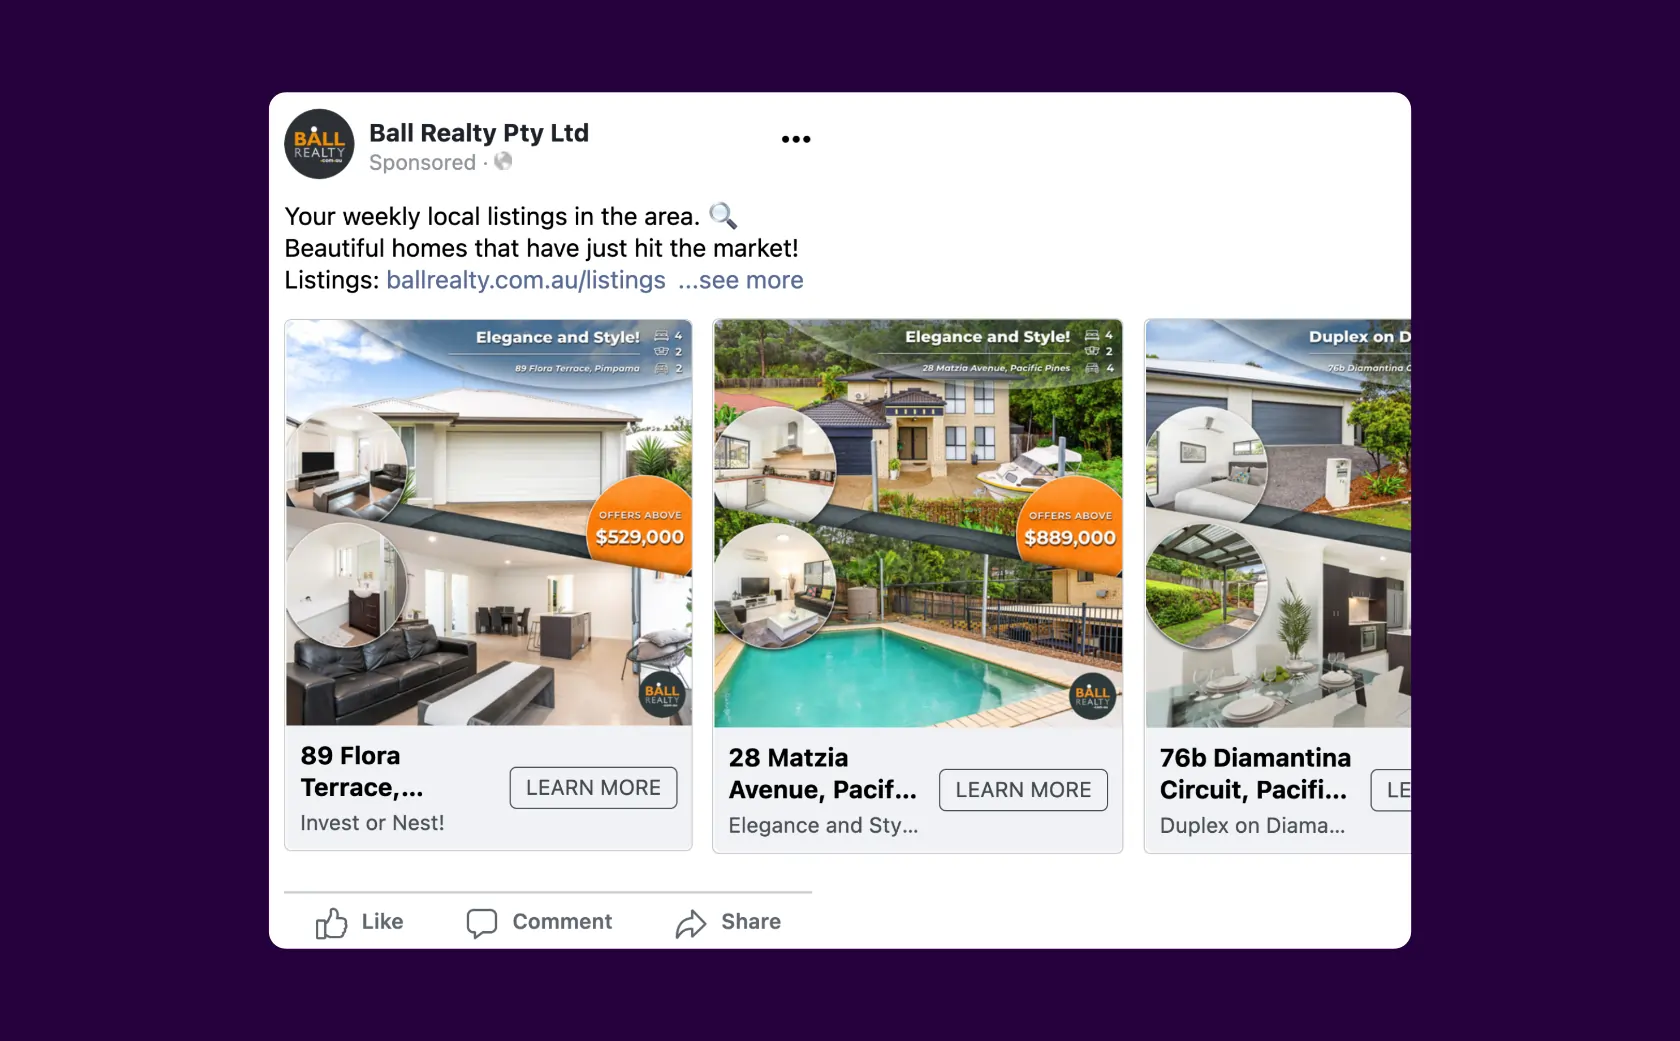 Facebook and Instagram ads, when done right can capture extreme amounts of attention and conversions. Leaving it to chance and you can burn money fast.